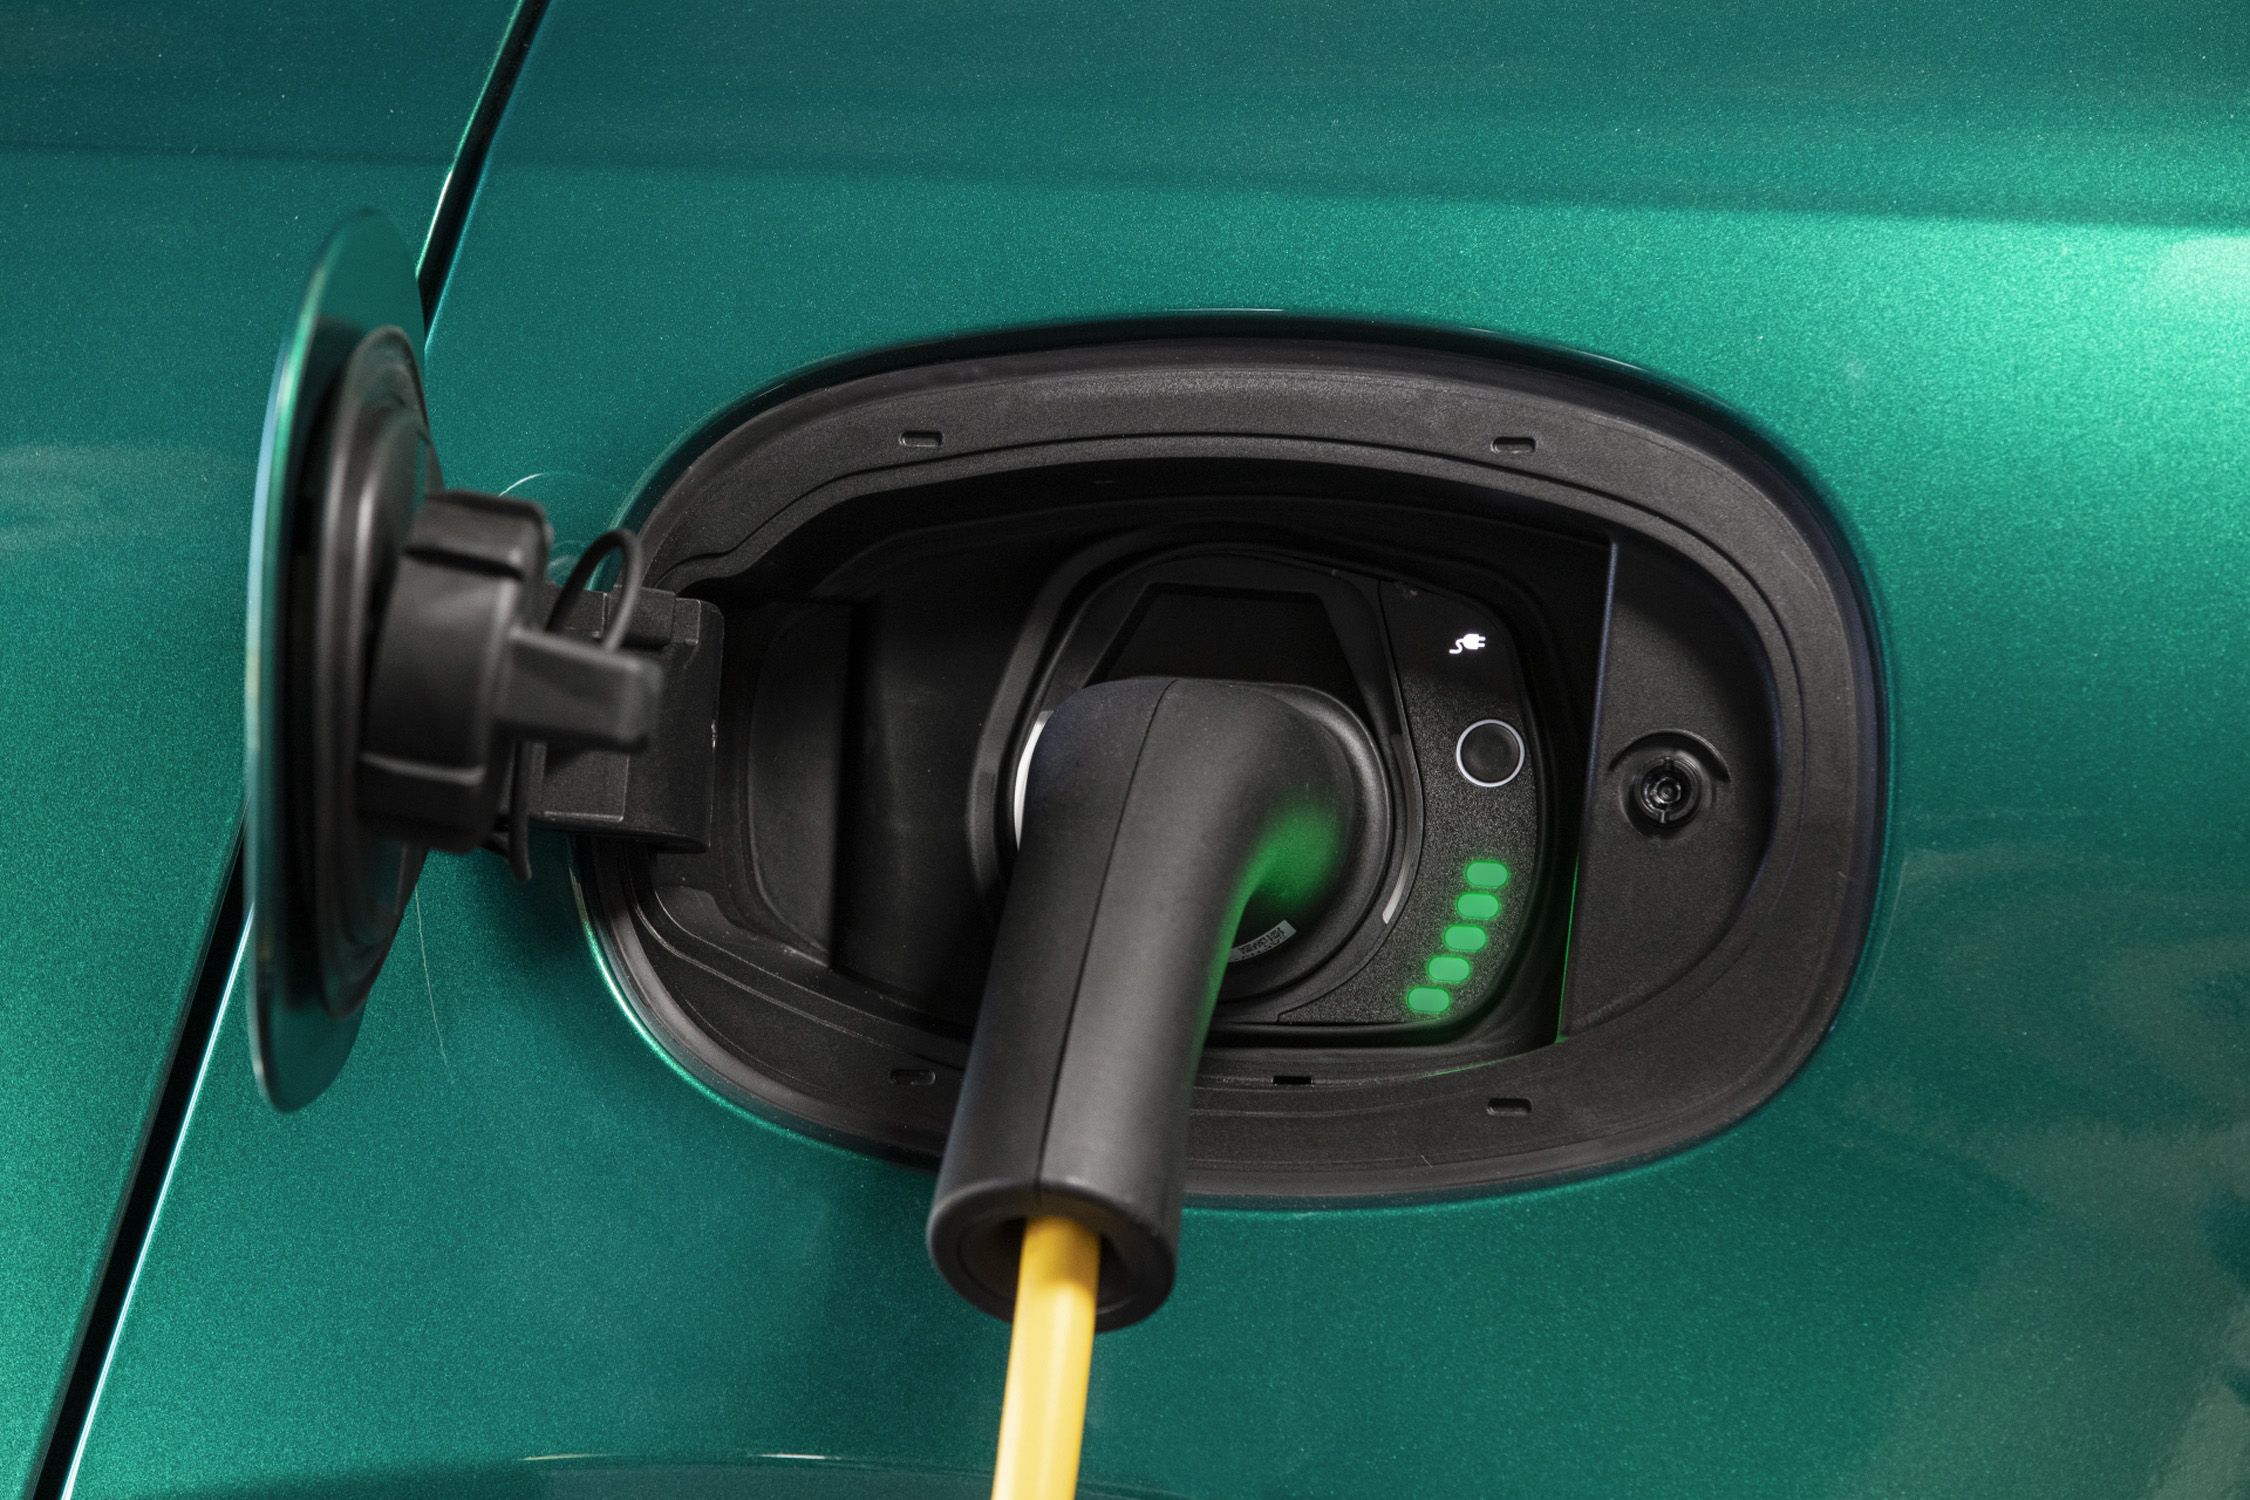 Types of Electric Vehicles: BEVs, PHEVs, HEVs - What's the Difference?